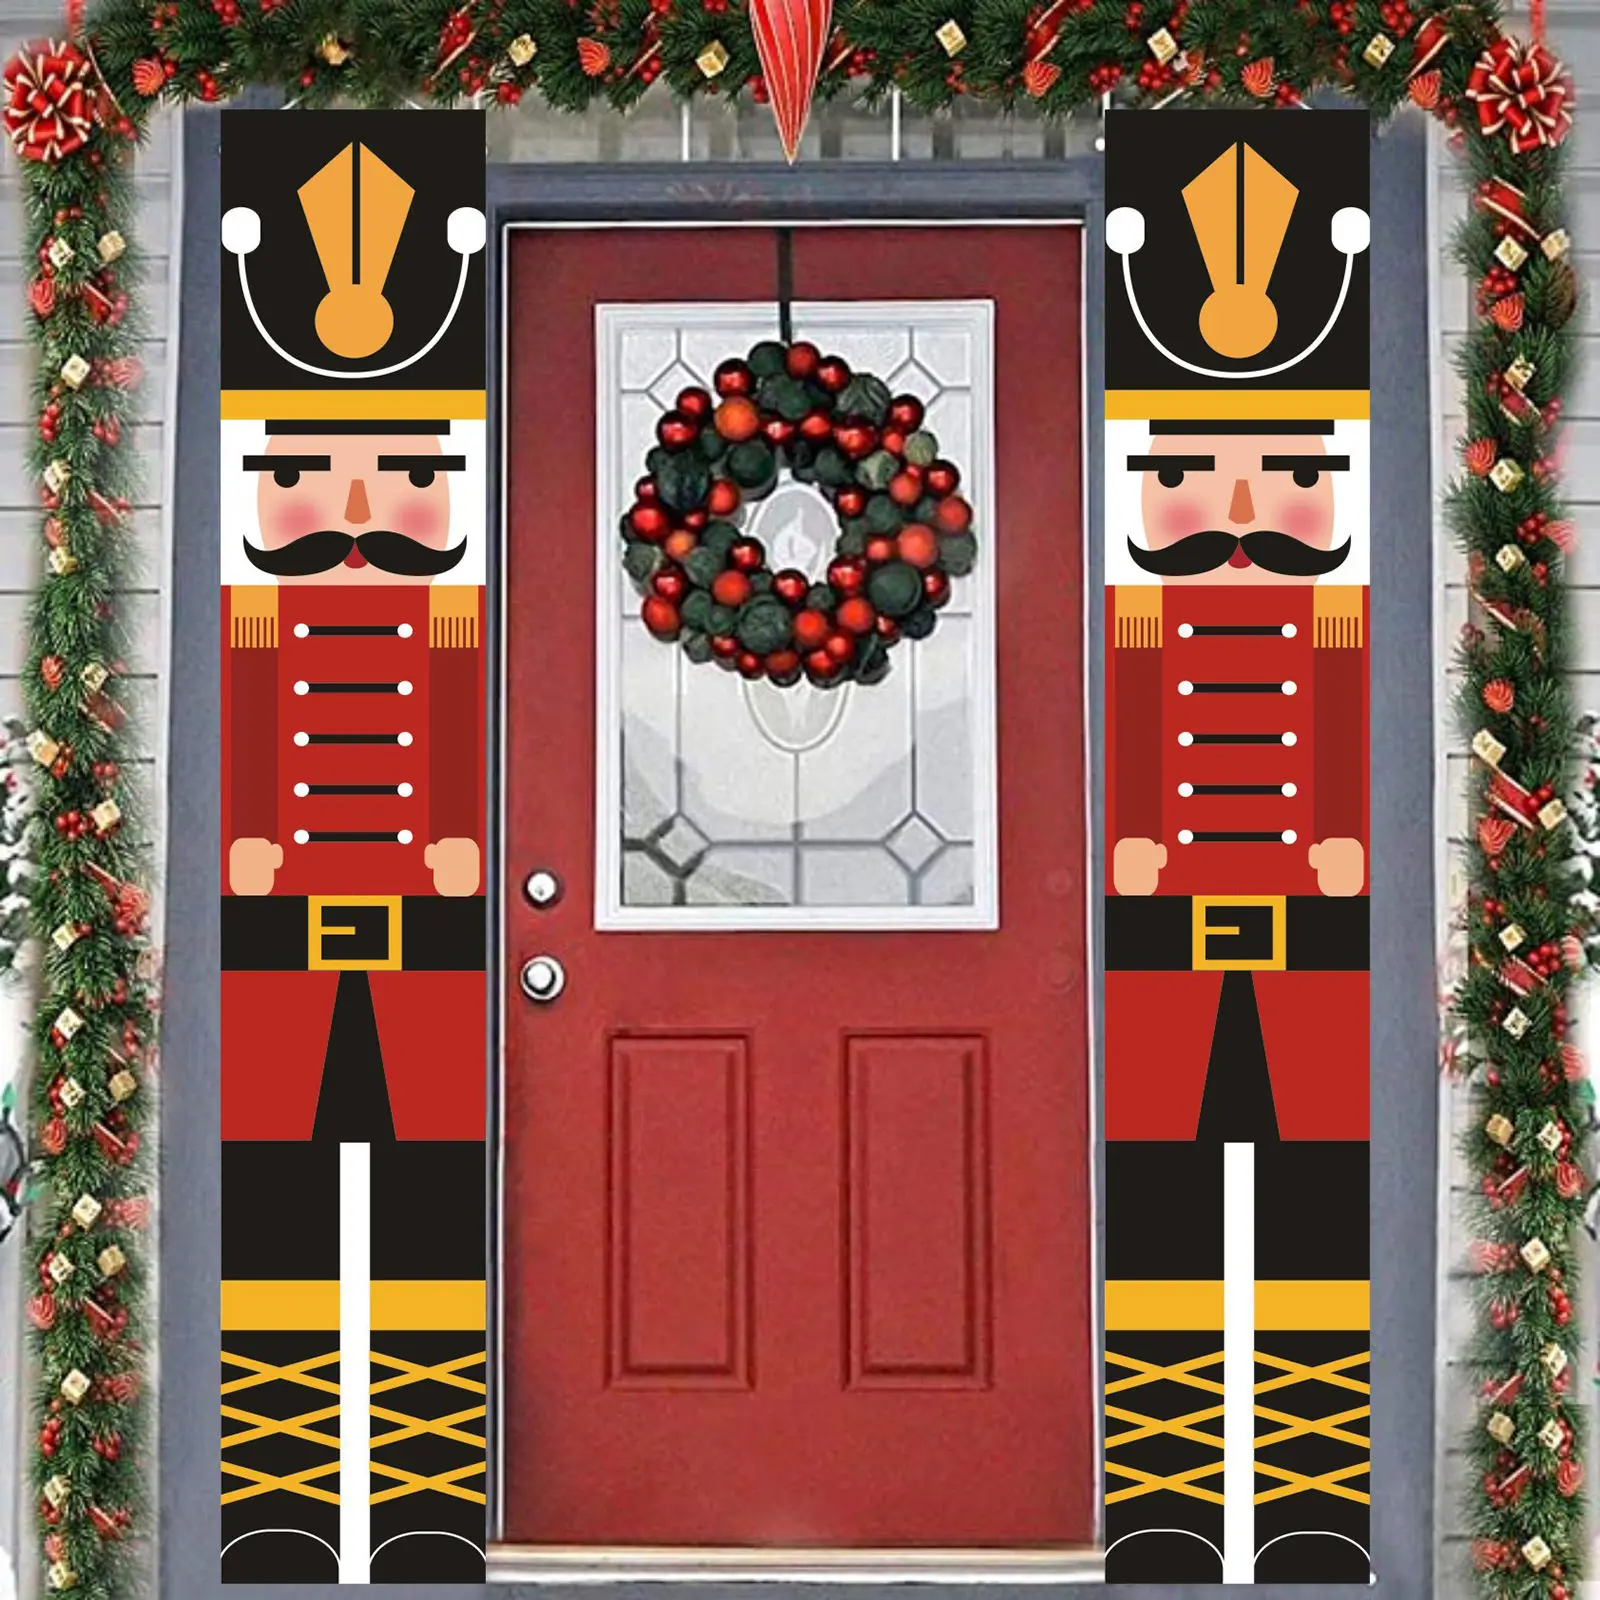 

Nutcracker Soldier Christmas Door Banner Ornament Santa Claus Merry Christmas Decorations For Home Navidad Gift New Year 2022